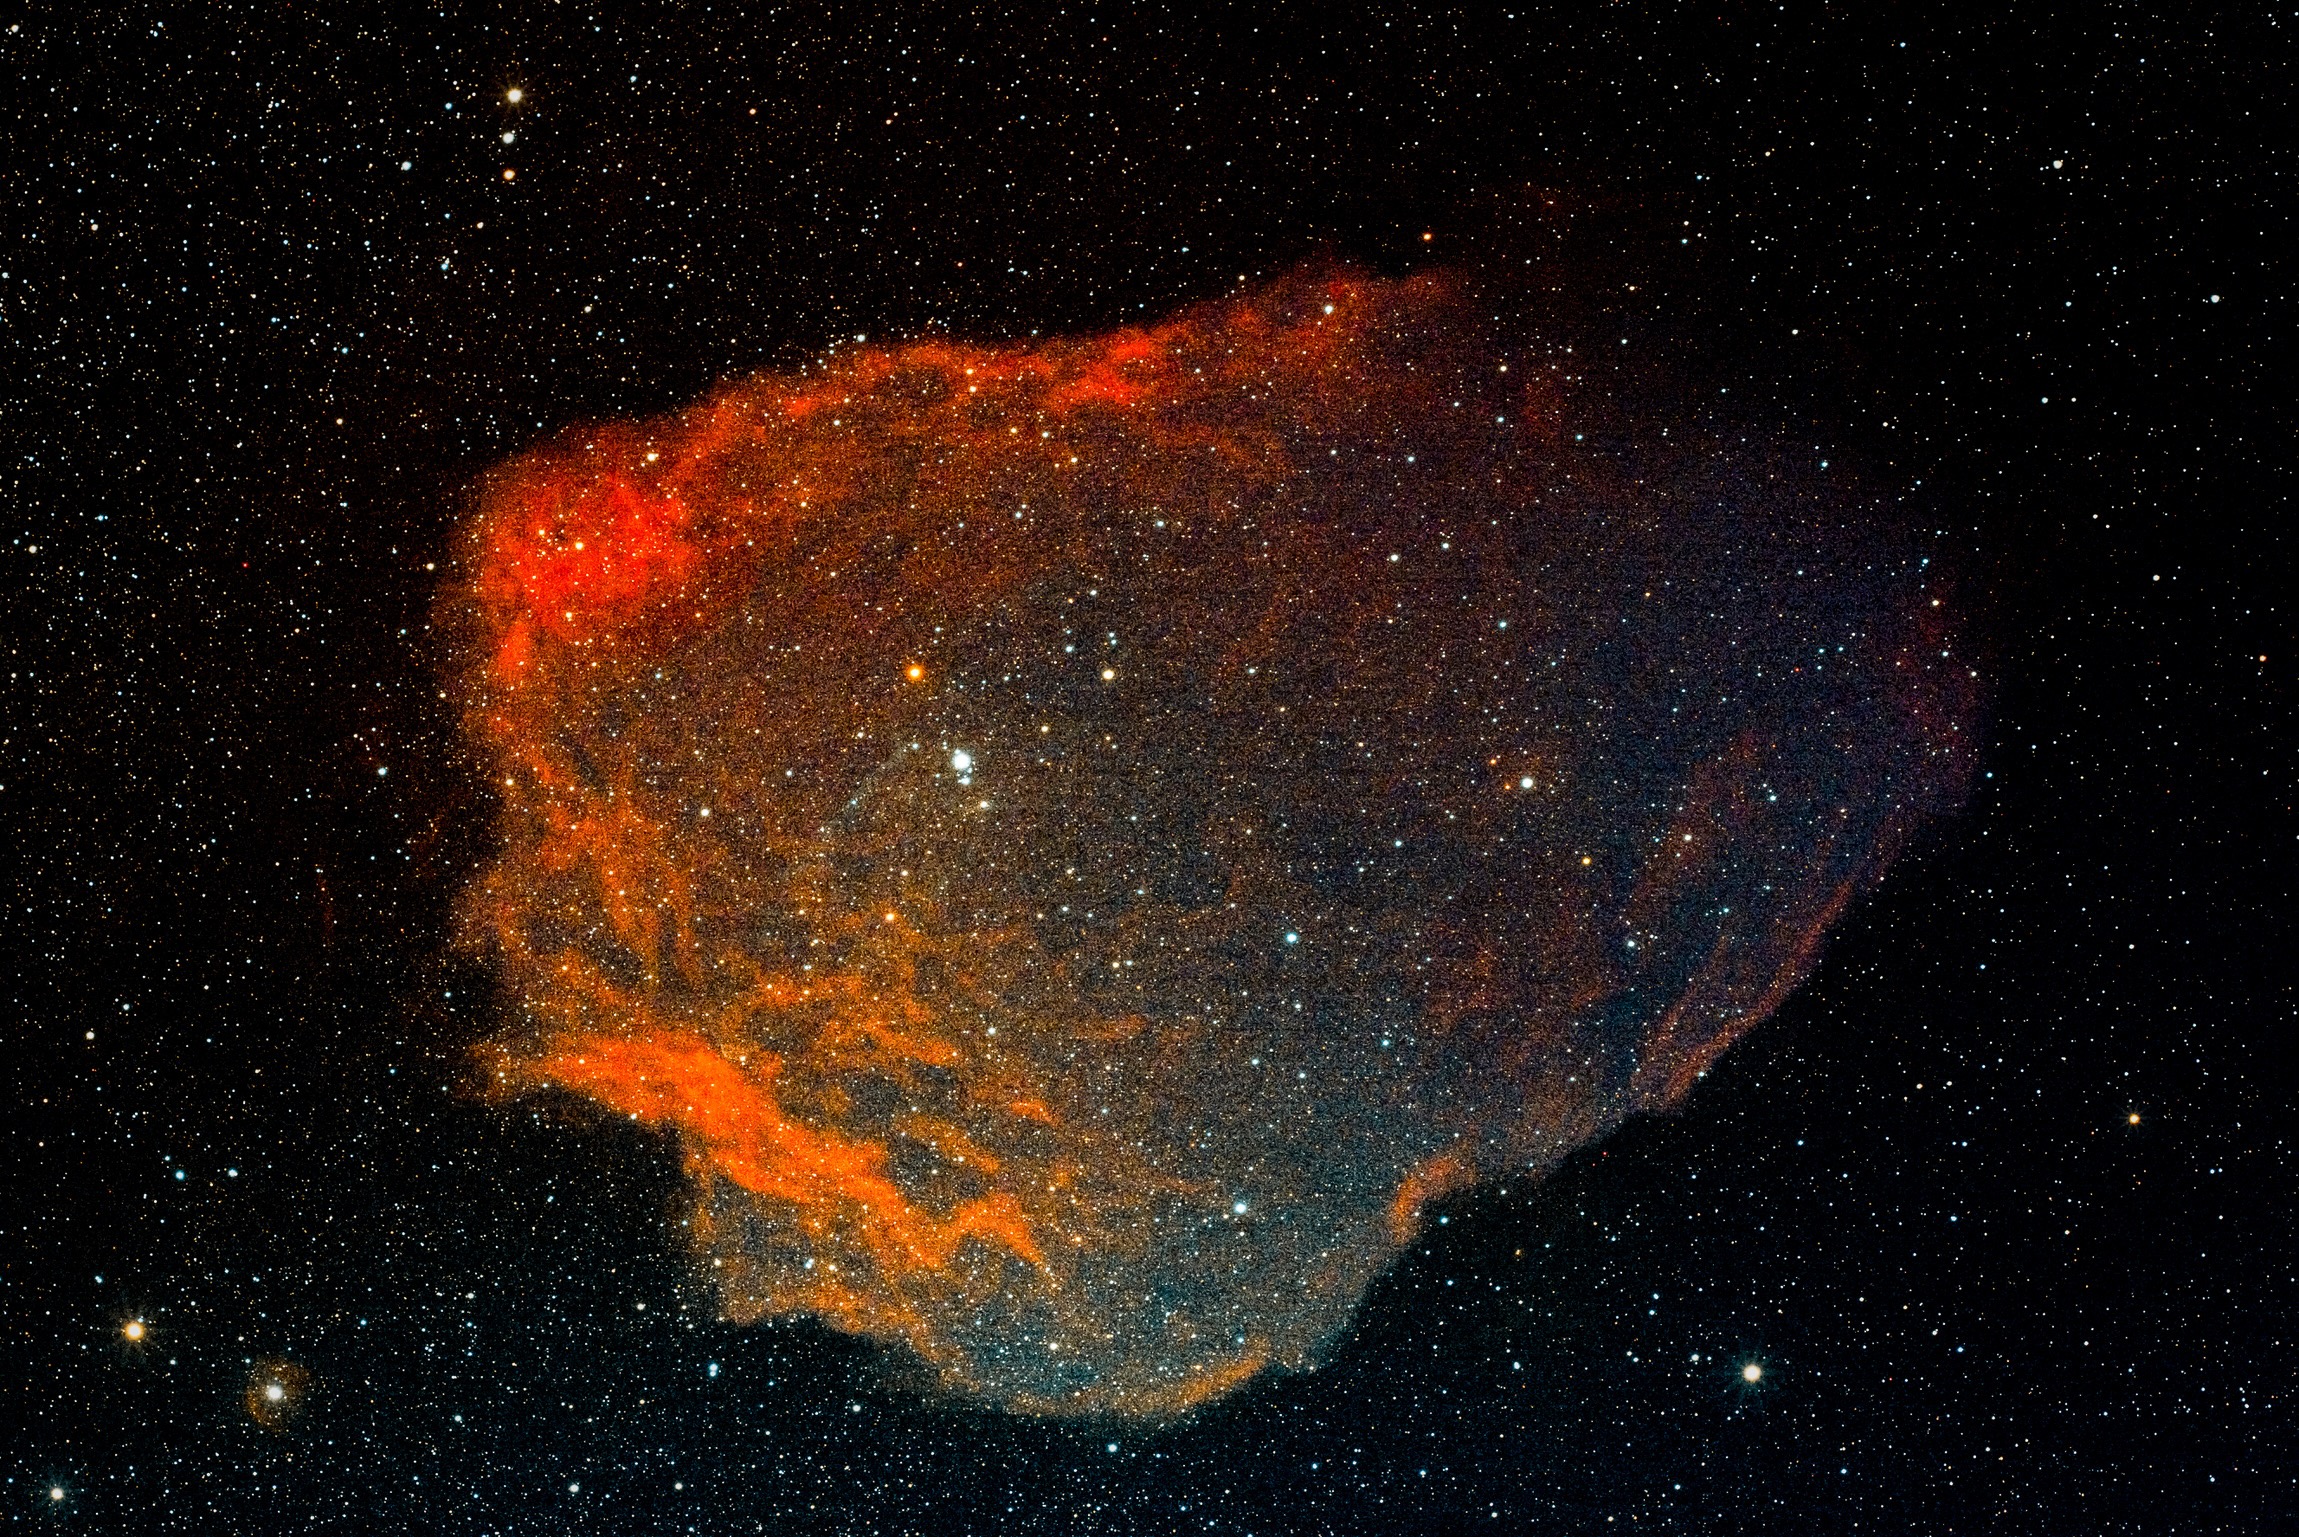 THE FLYING BAT AND SQUID NEBULAE. Around 2000 light-years from Earth is the Flying Bat Nebula (Sh2-129), seen here as a huge cloud of red hydrogen gas. Within this is the glowing blue Squid Nebula (OU4), thought to be a low-mass star near the end of its life, blasting its outer layers off in two opposite directions.